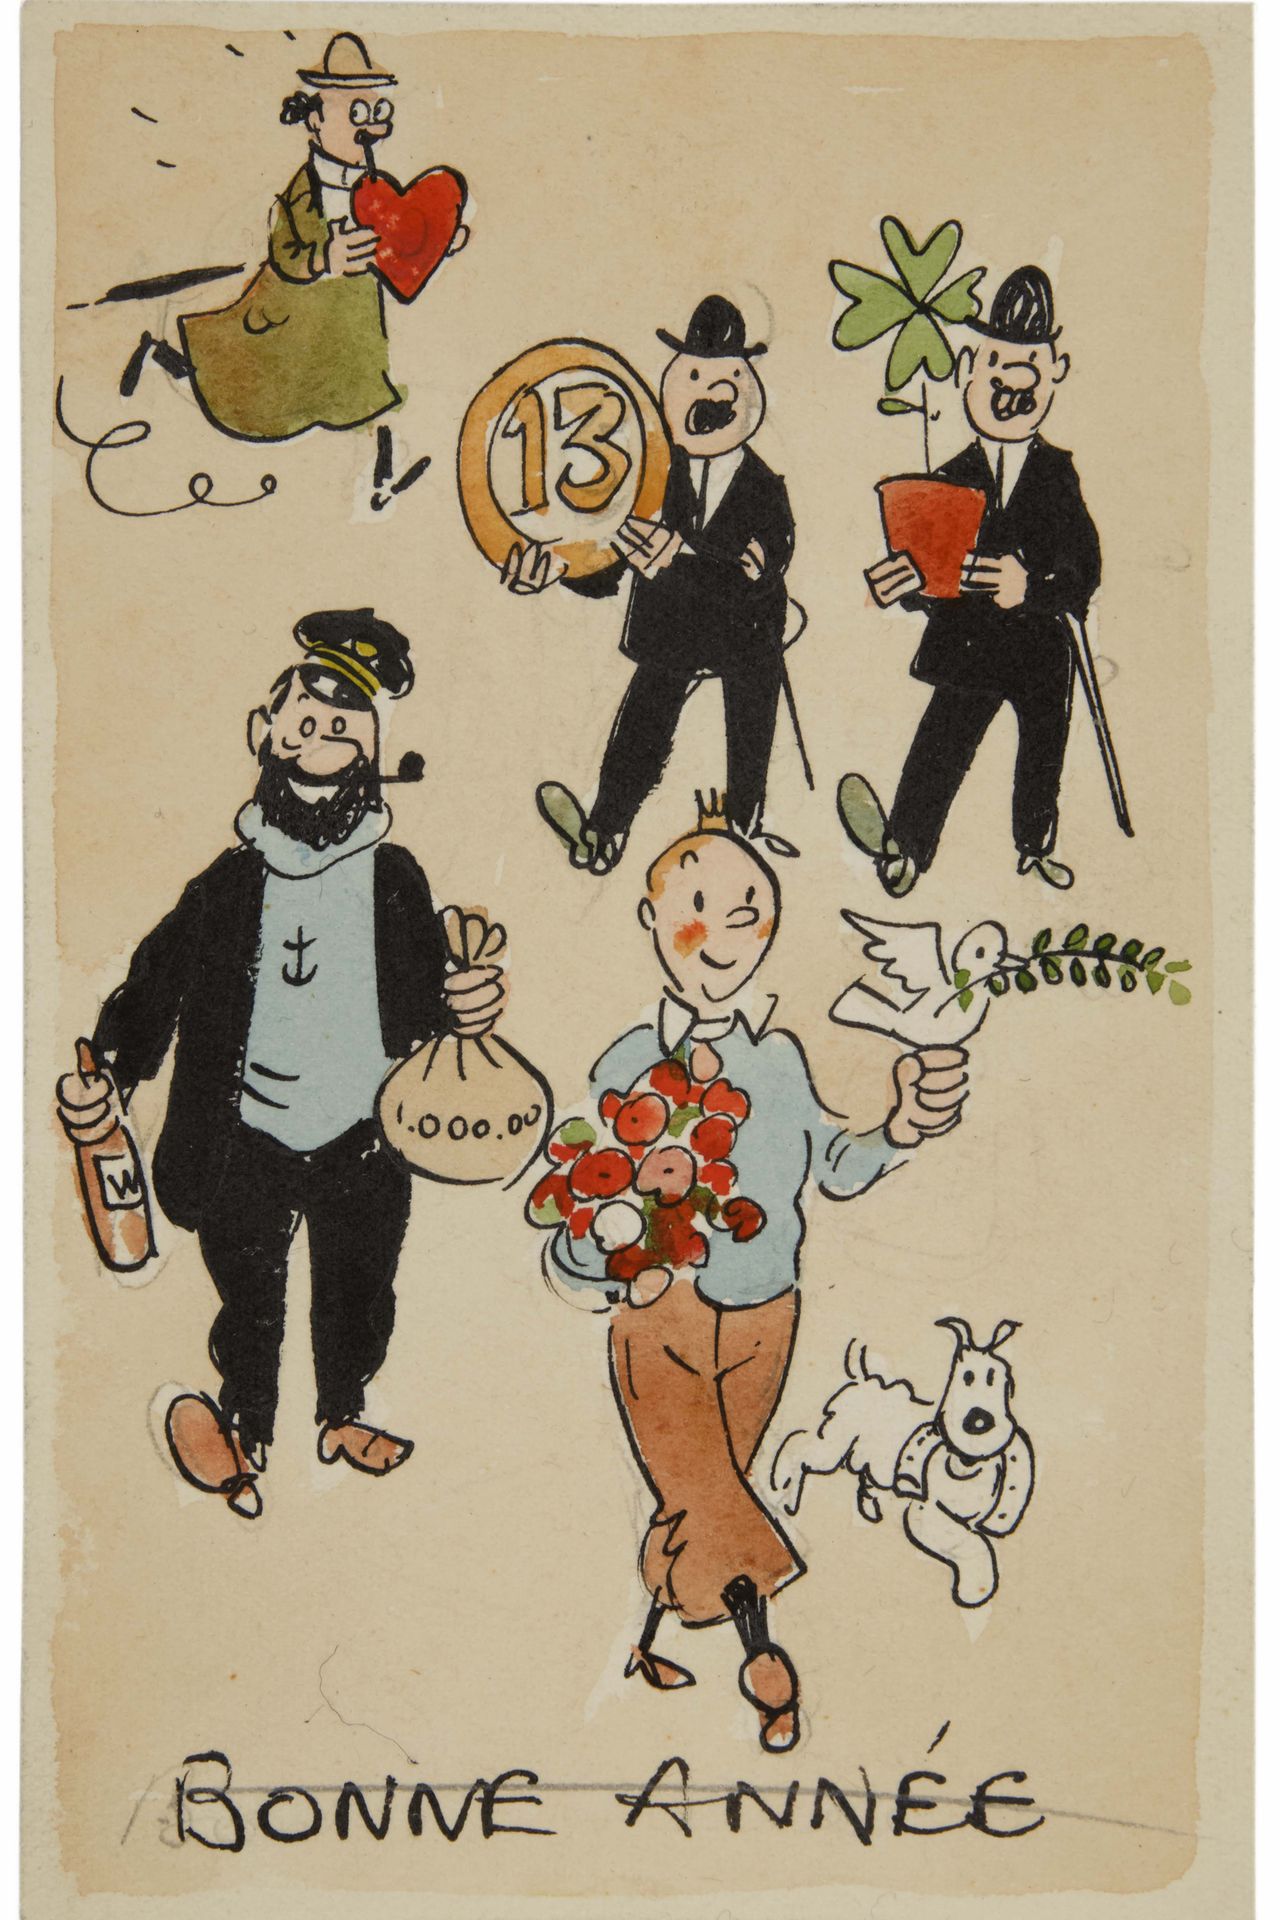 Hergé - Georges Rémi (Belgian, 1907 - 1983) 
Design for New Year's Card - 1940s
&hellip;